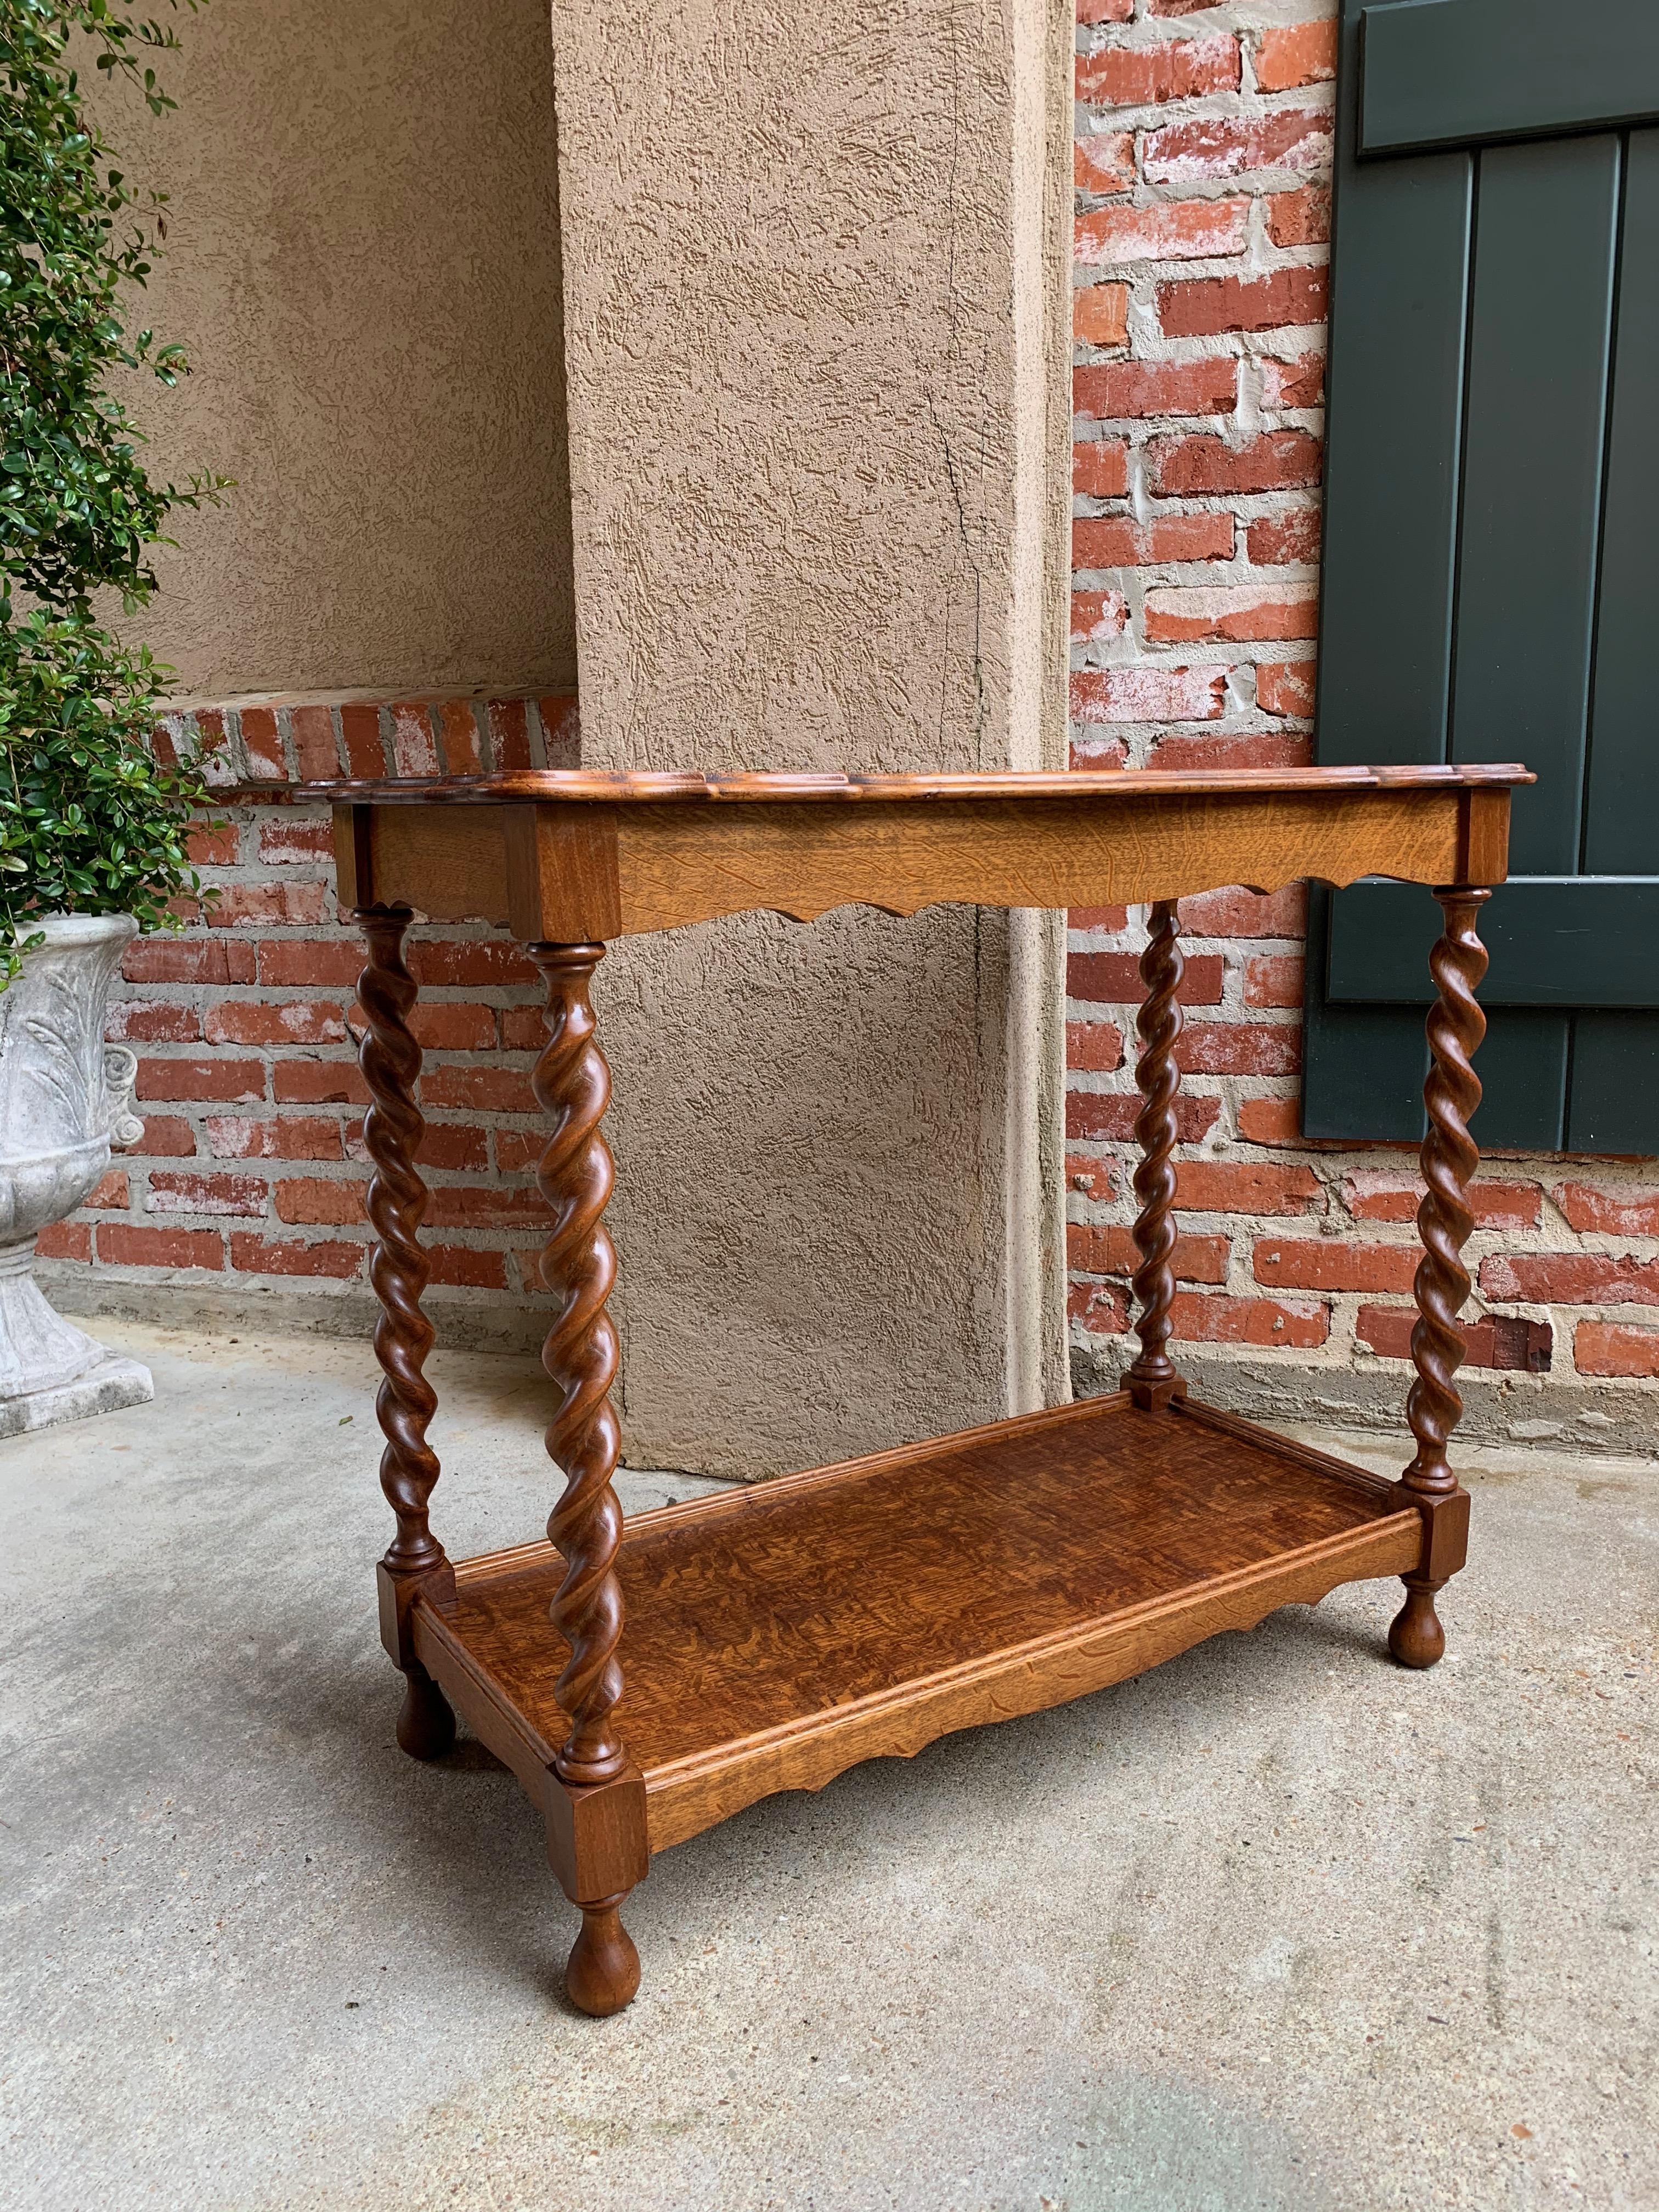 Direct from England, a lovely and versatile antique English tiger oak, barley twist side table!~
~Extra features include a beveled and scalloped upper table edge~
~Lower shelf provides more display and storage area, and in true British style, the